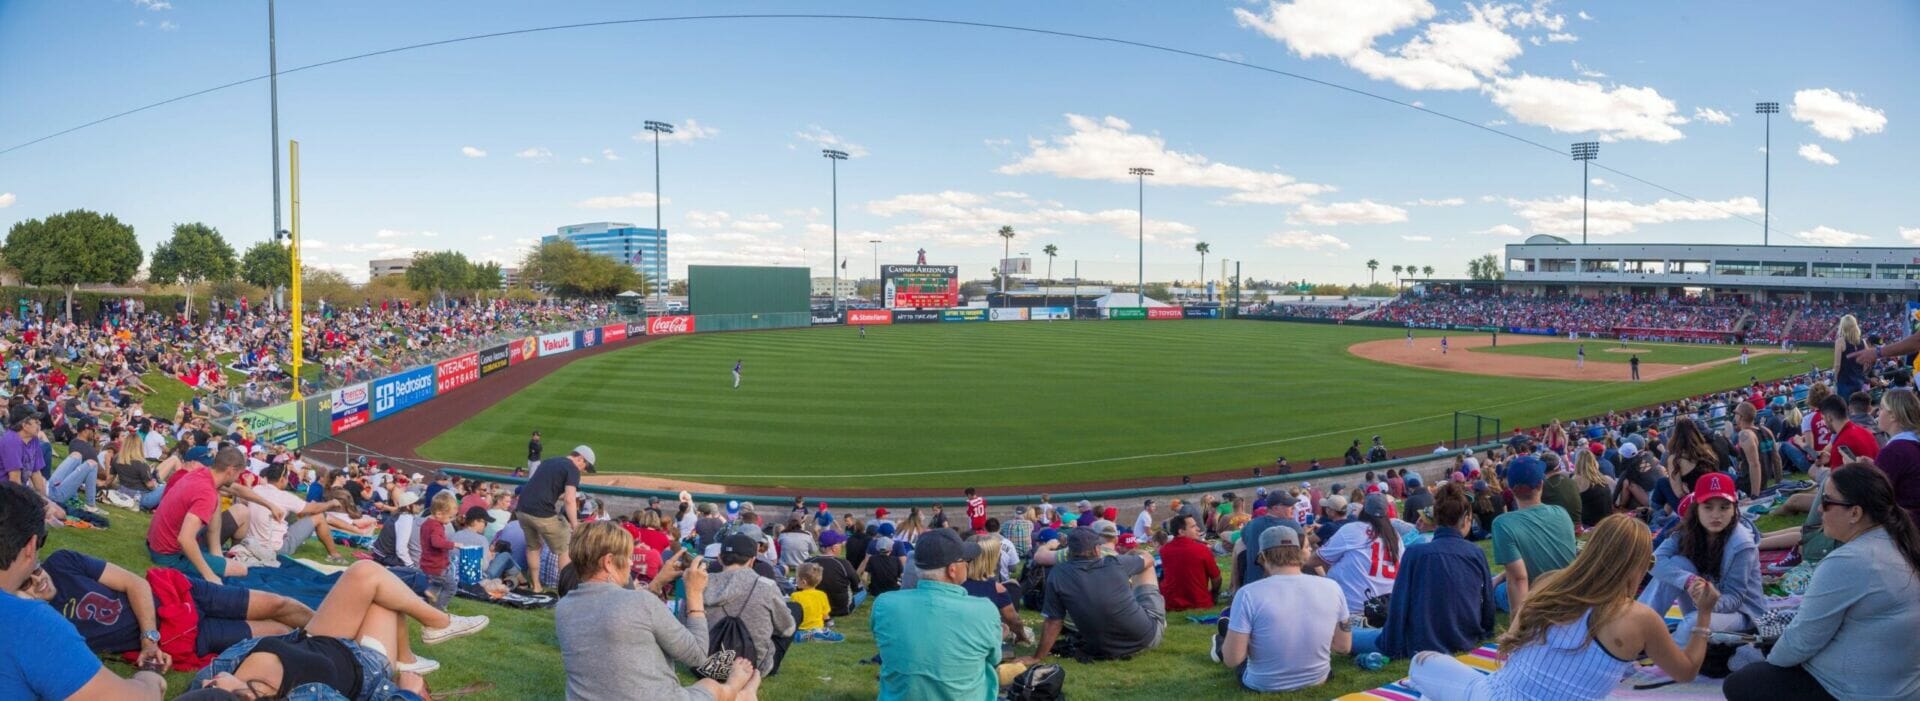 Spring Training in Arizona: Cactus League Schedules, Hotels and Tips